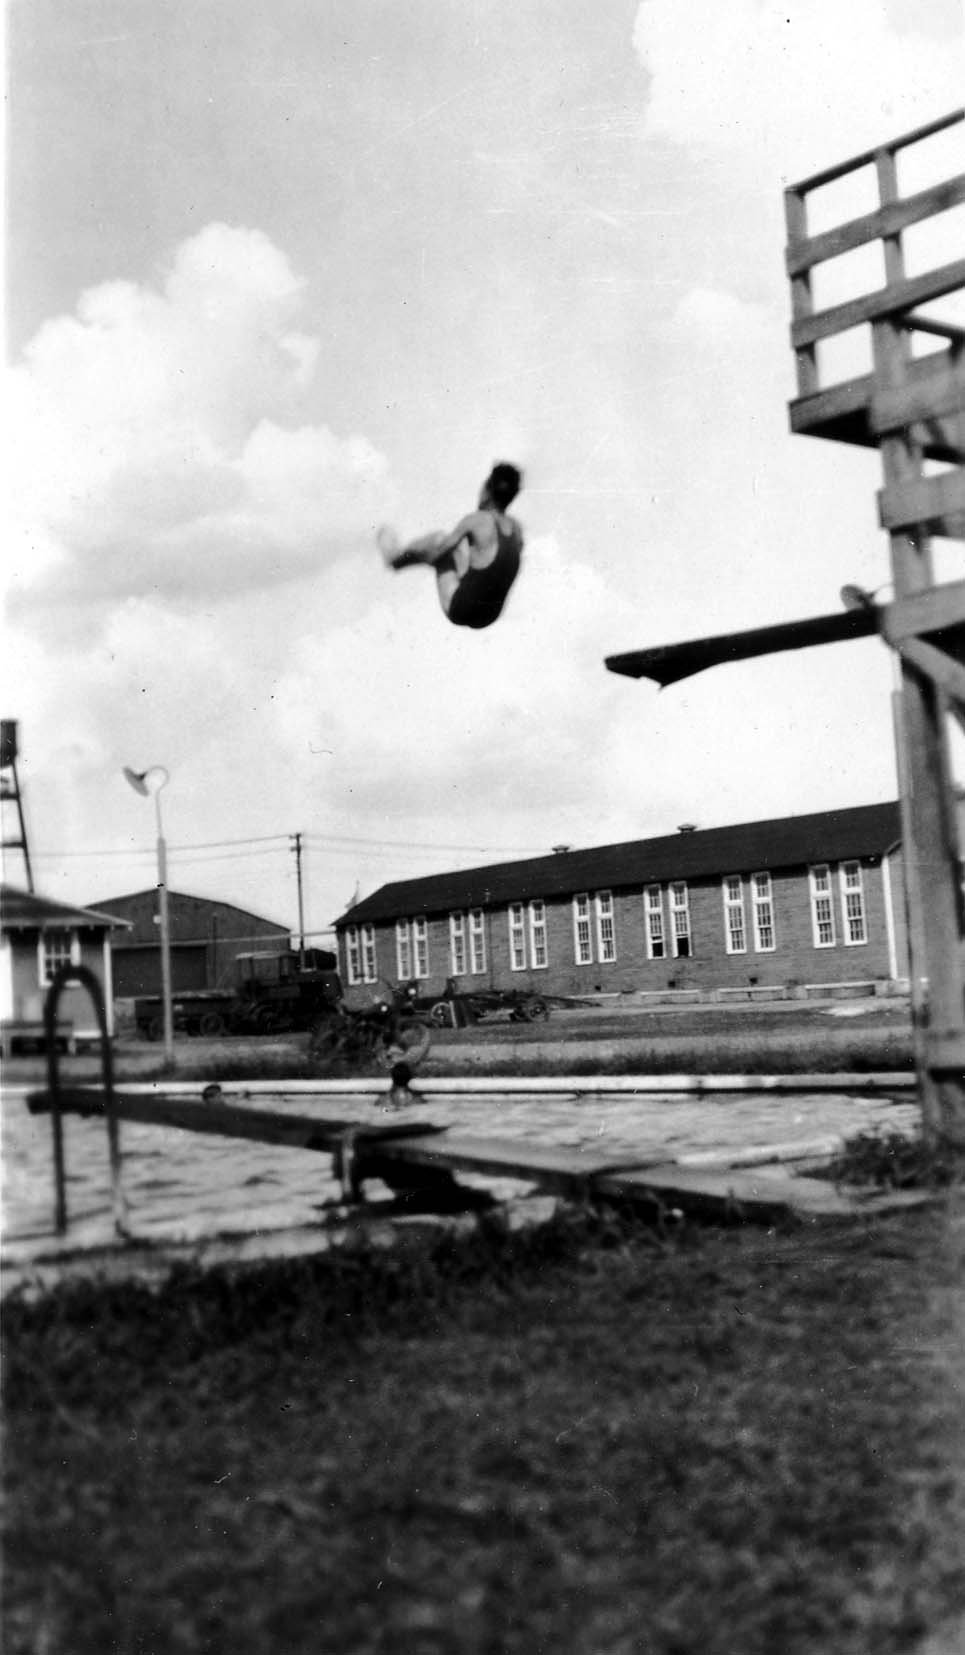 Vintage Black and White photograph of male diver captured in mid-air as he tumbles off a jumping board into a pool. Photo taken by Donald Hall in 1925 at Brooks Field Army base in Texas.